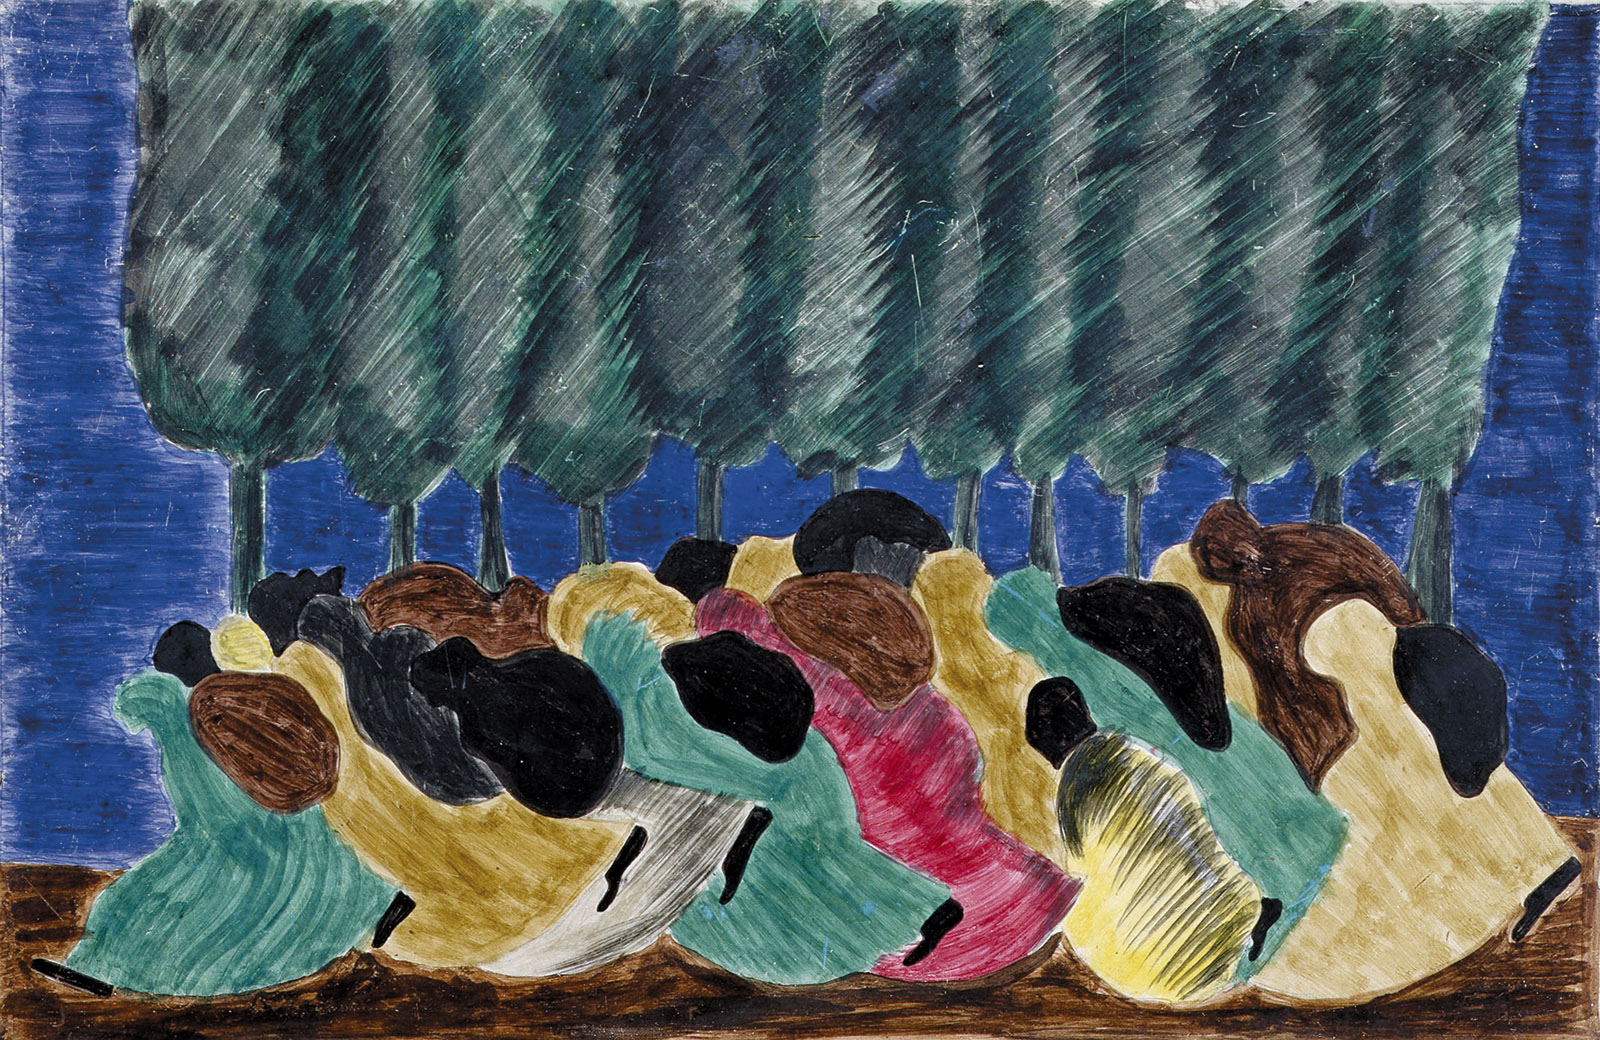 The Life of Harriet Tubman, #16, 1940, a painting by Jacob Lawrence